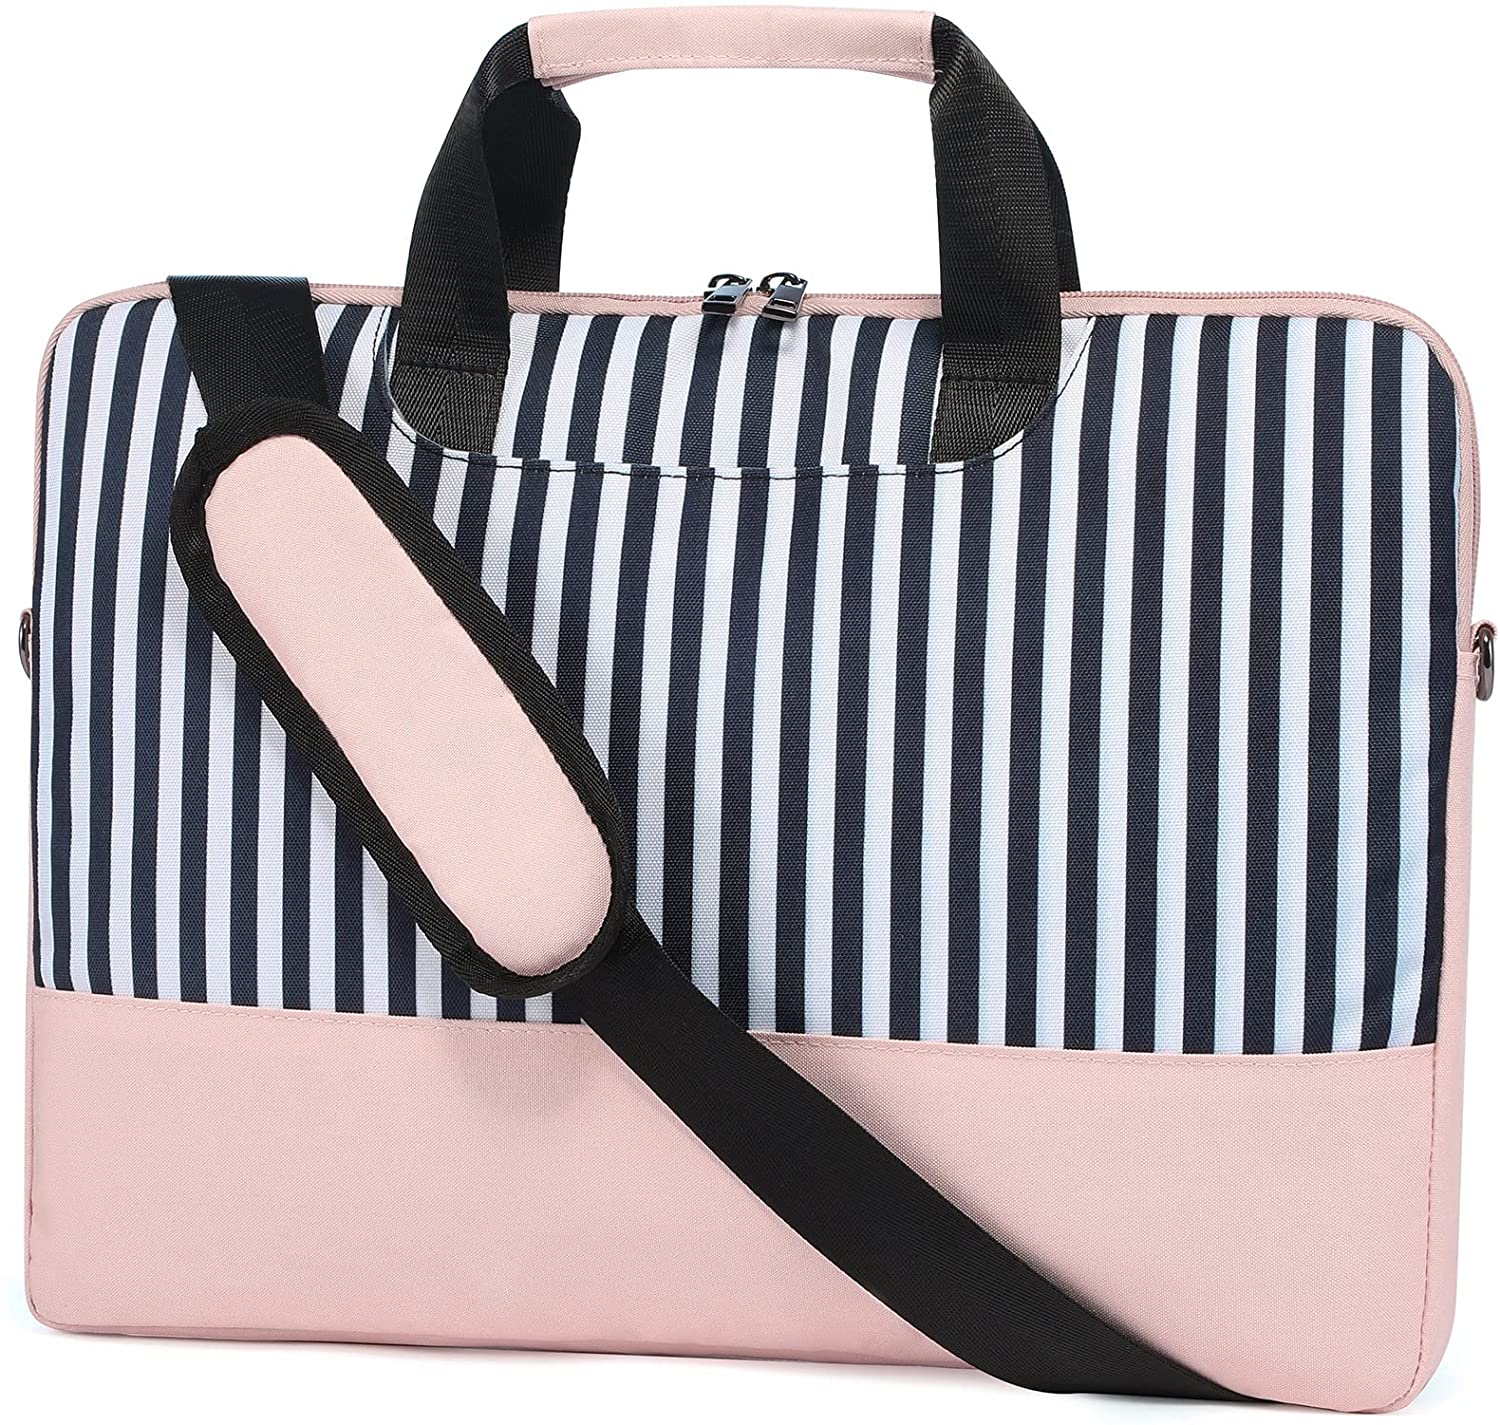 Laptop Bag for Women 15.6 Inch Laptop Case Sleeve 4 Compartments